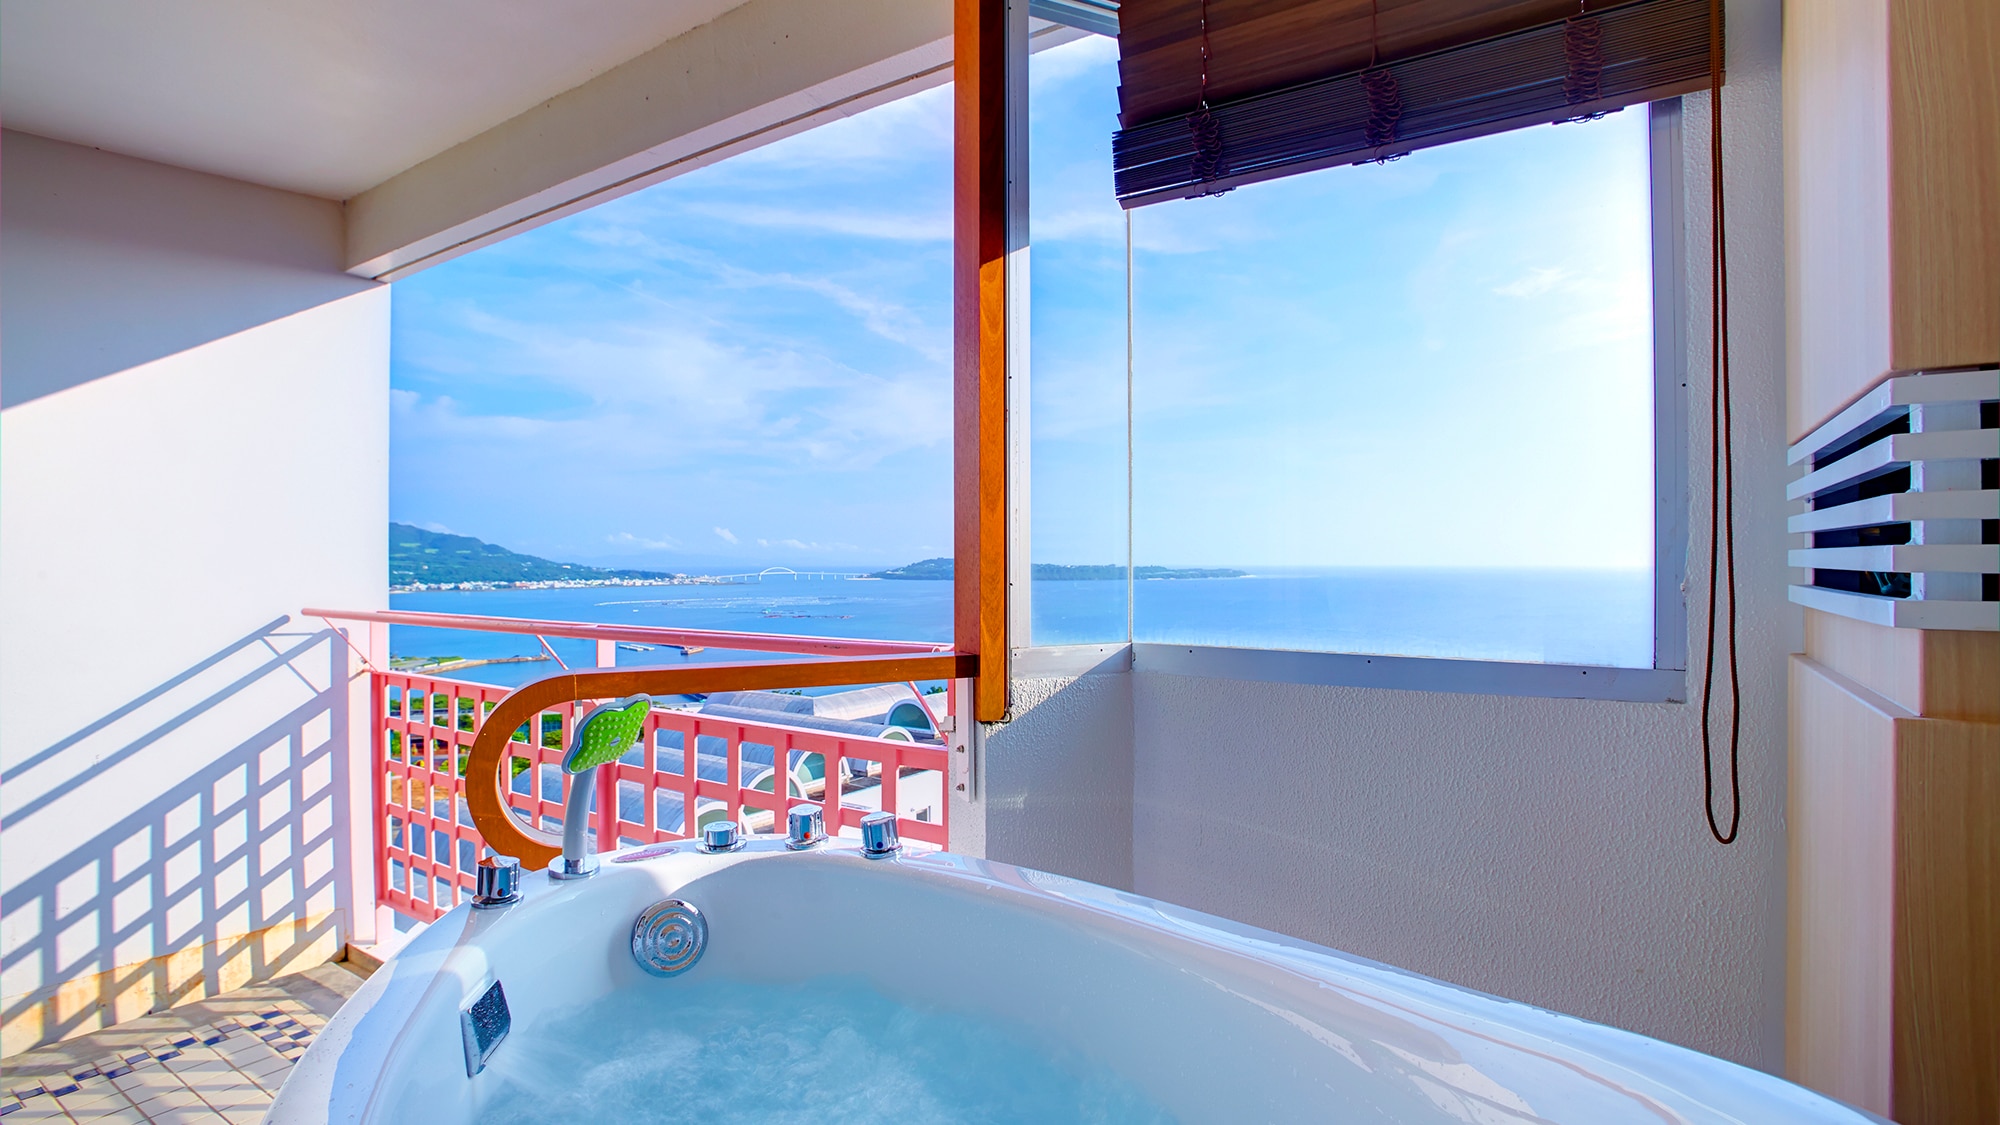 [Ocean Premier Western Room + View Bath] Premium twin room. Equipped with a view bath on the balcony.